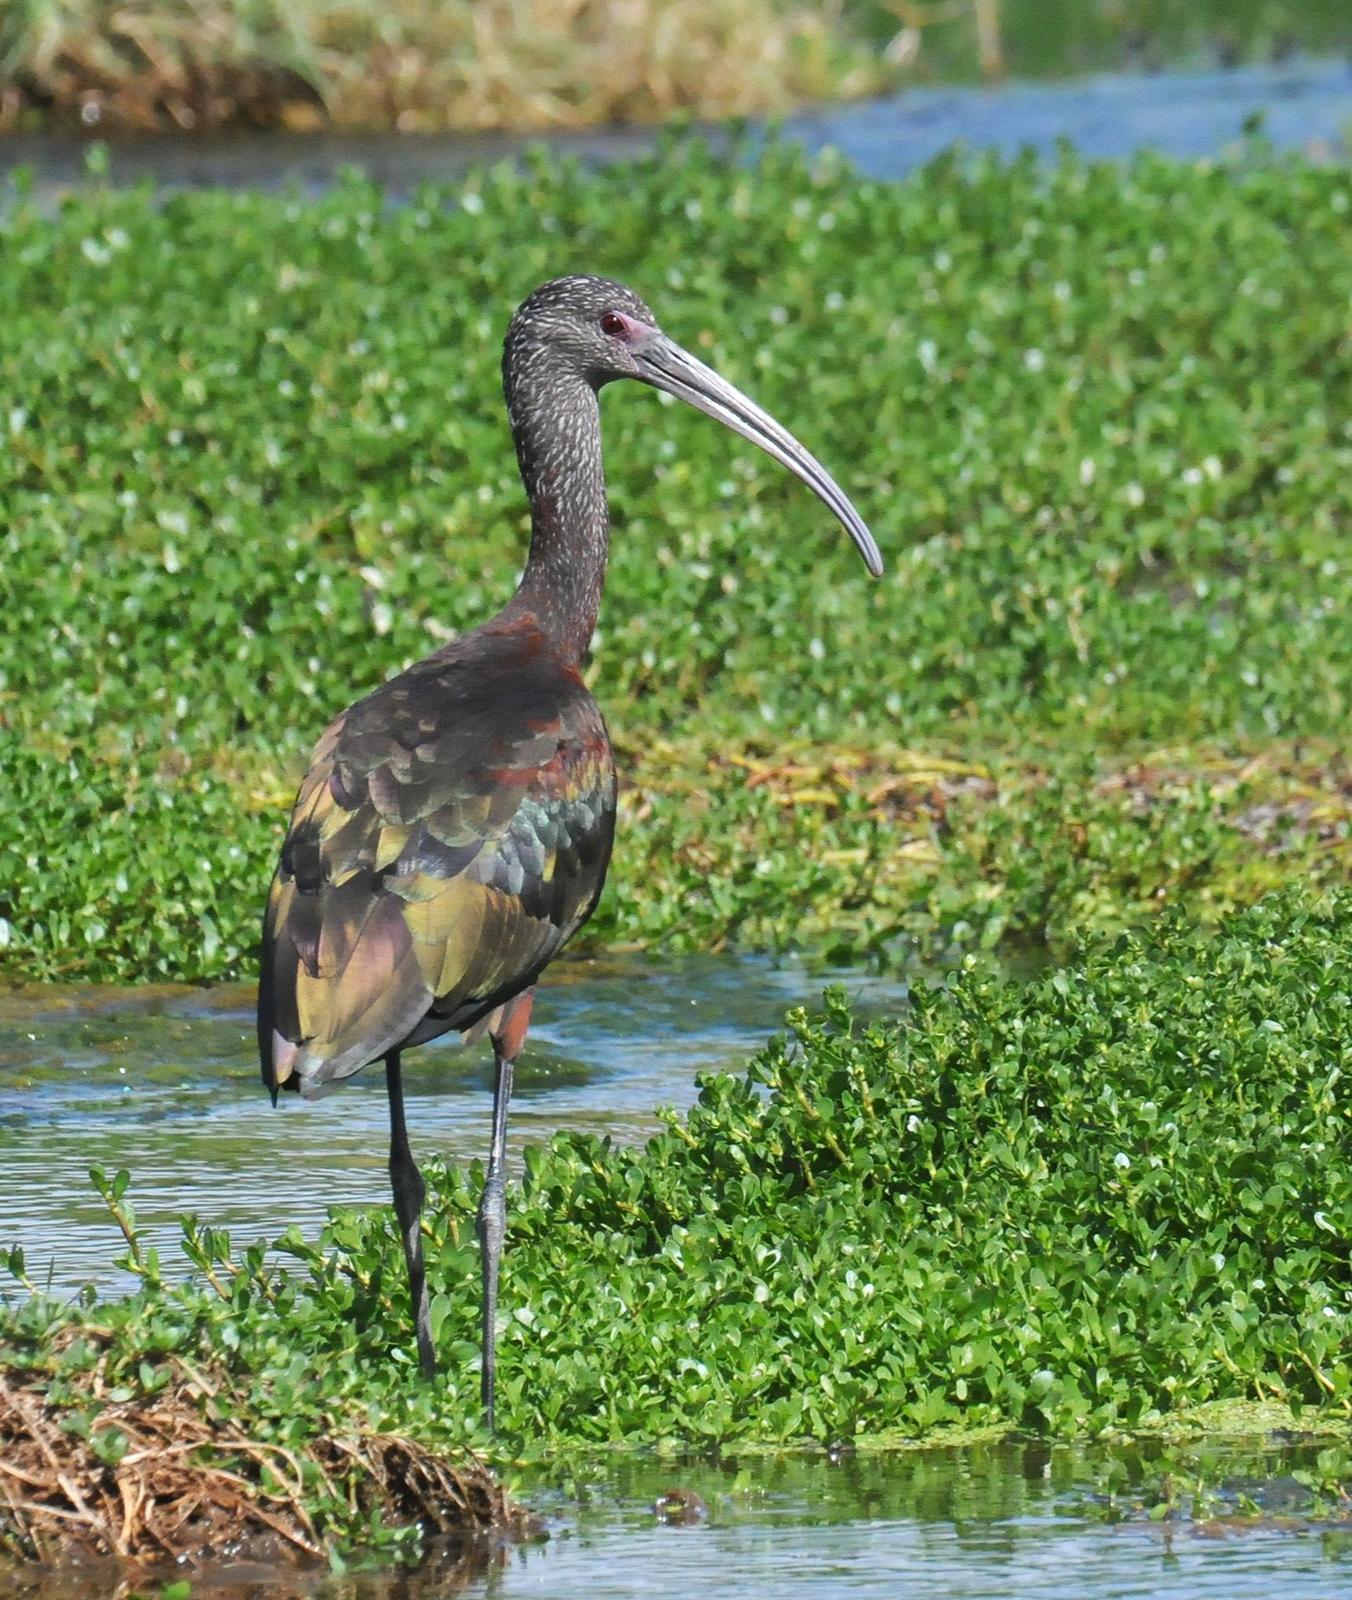 White-faced Ibis Photo by Steven Mlodinow